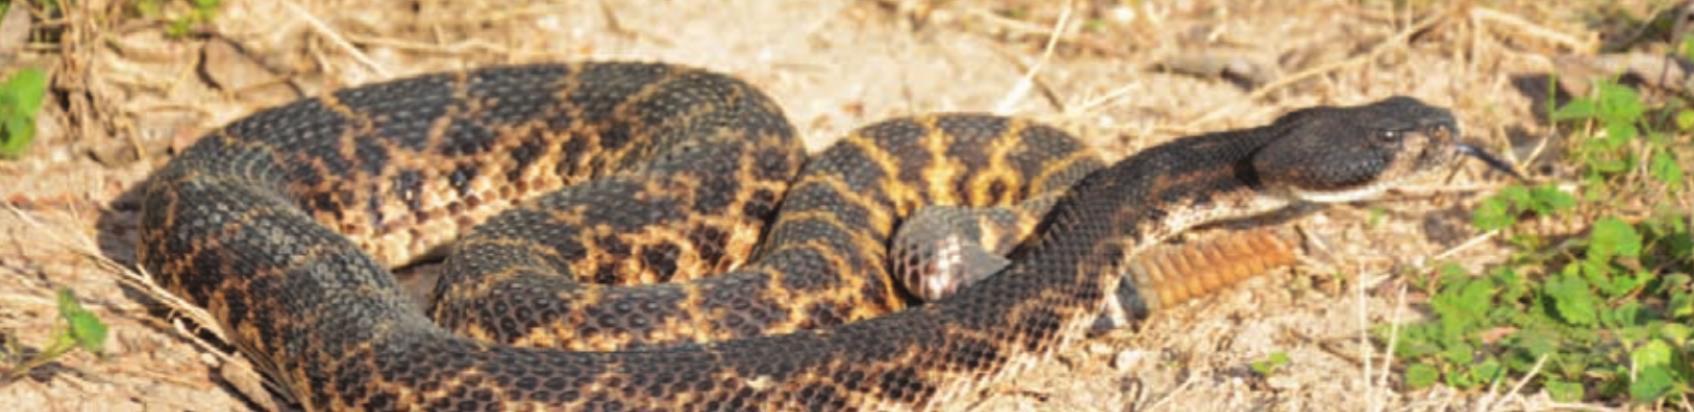 A western diamondback rattlesnake lies coiled on the ground. A Texas A&amp;M AgriLife Extension Service specialist has warned Texans to be alert for snakes during warm weather. FILE PHOTO